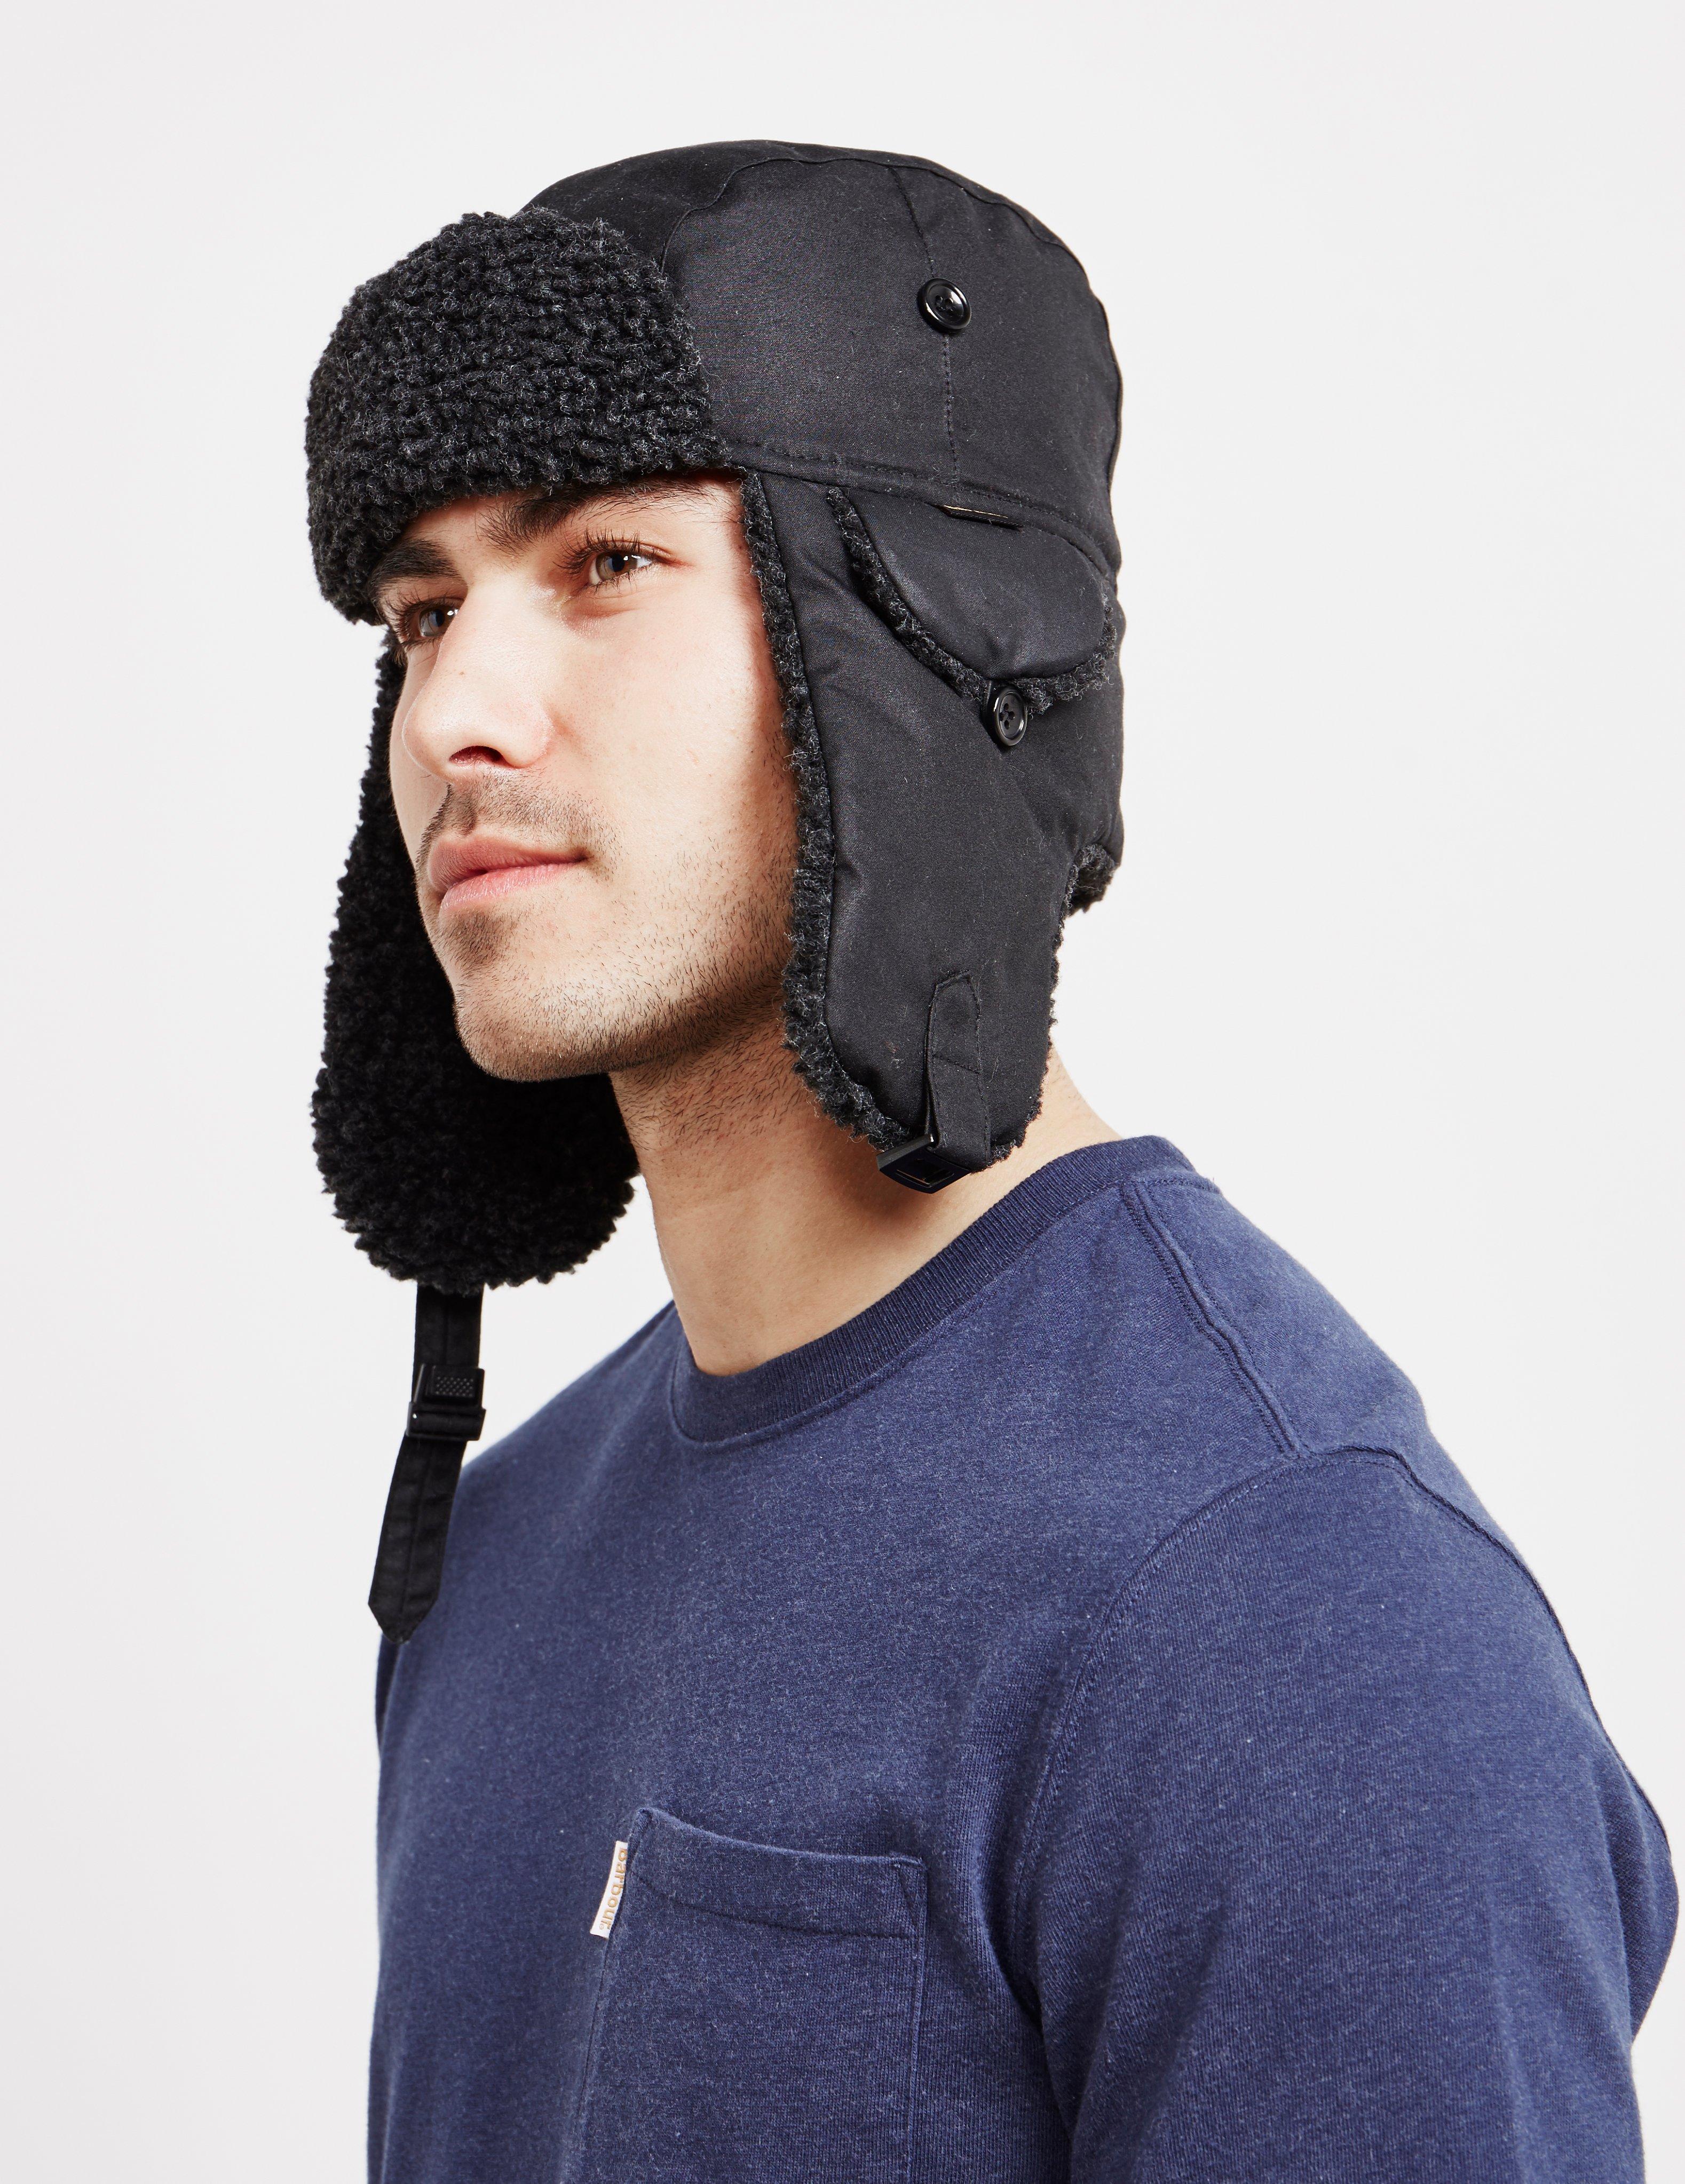 Barbour Fleece Lined Trapper Hat Top Sellers, 58% OFF |  www.chine-magazine.com